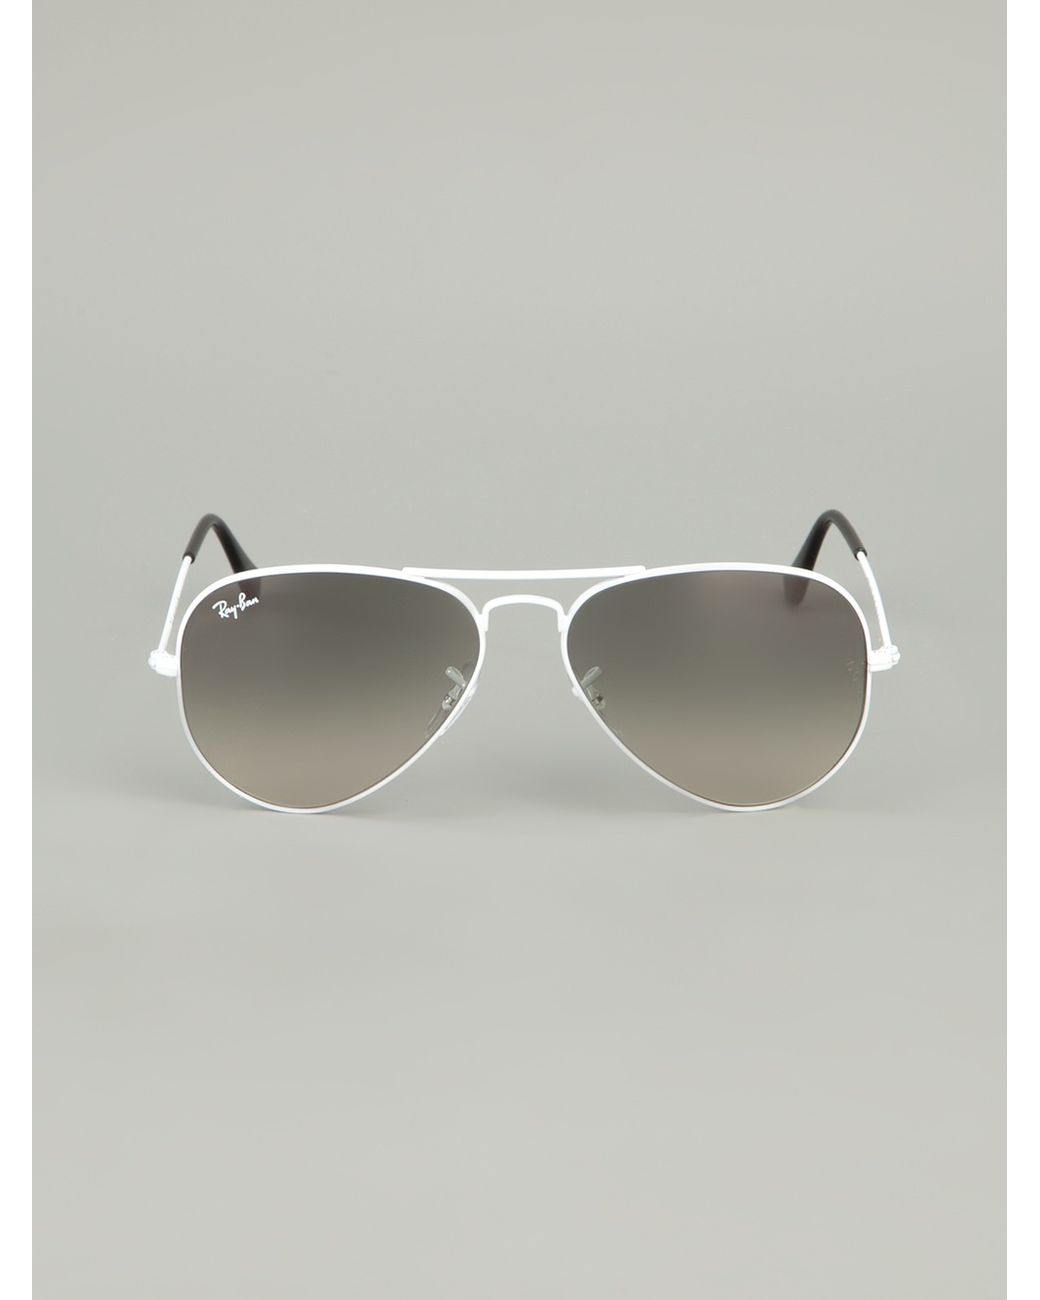 Arriba 89+ imagen ray ban with white frame